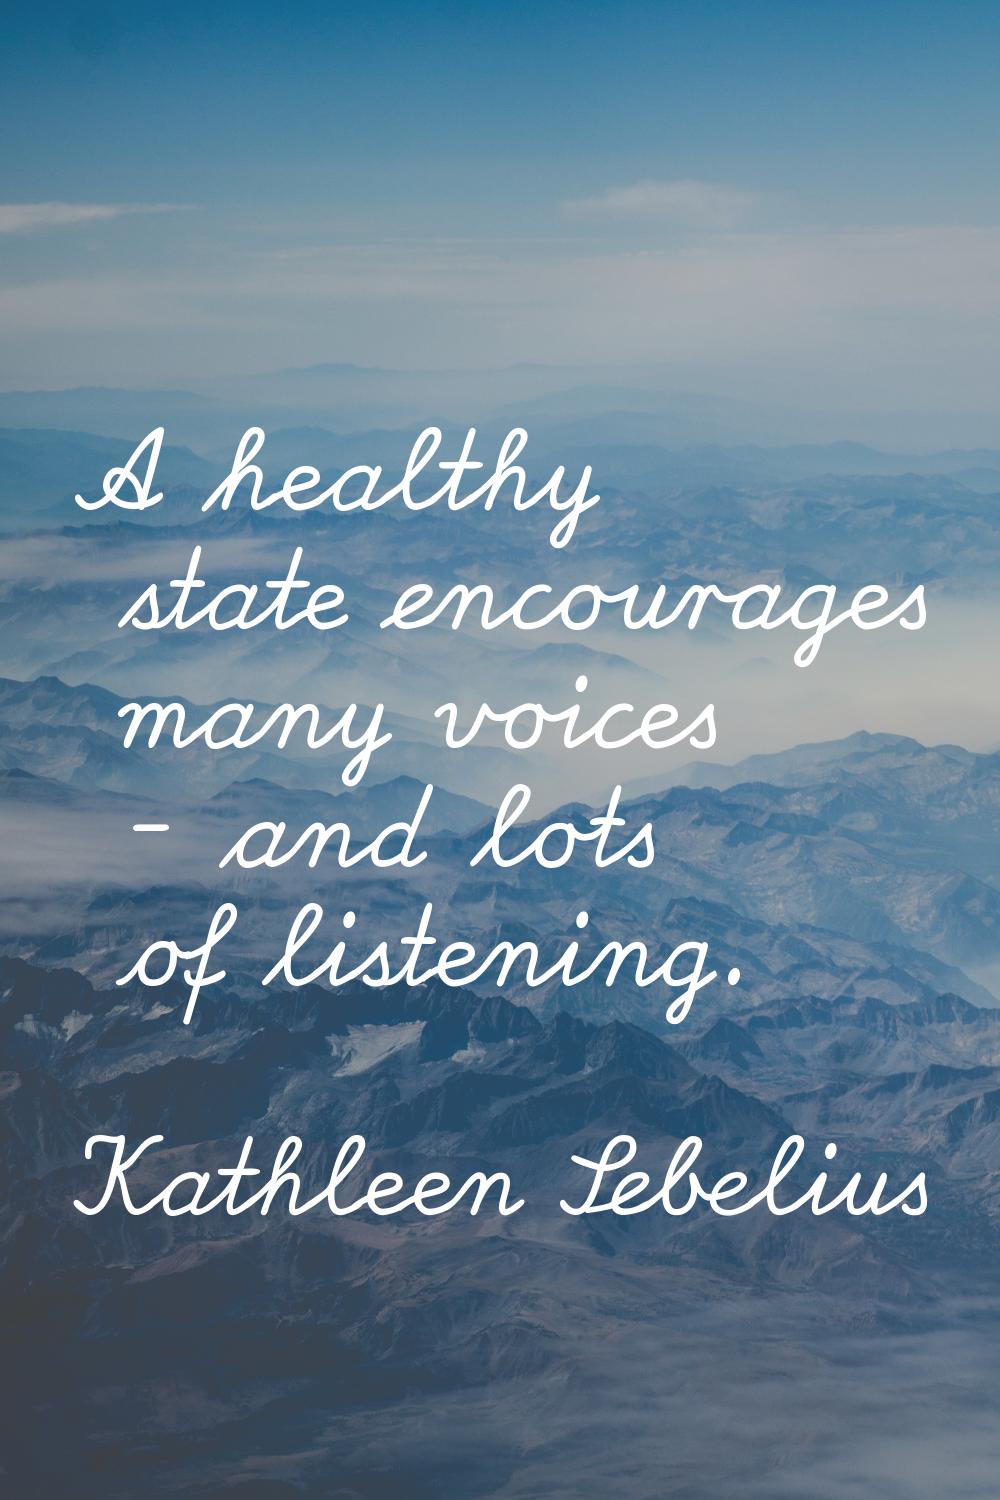 A healthy state encourages many voices - and lots of listening.